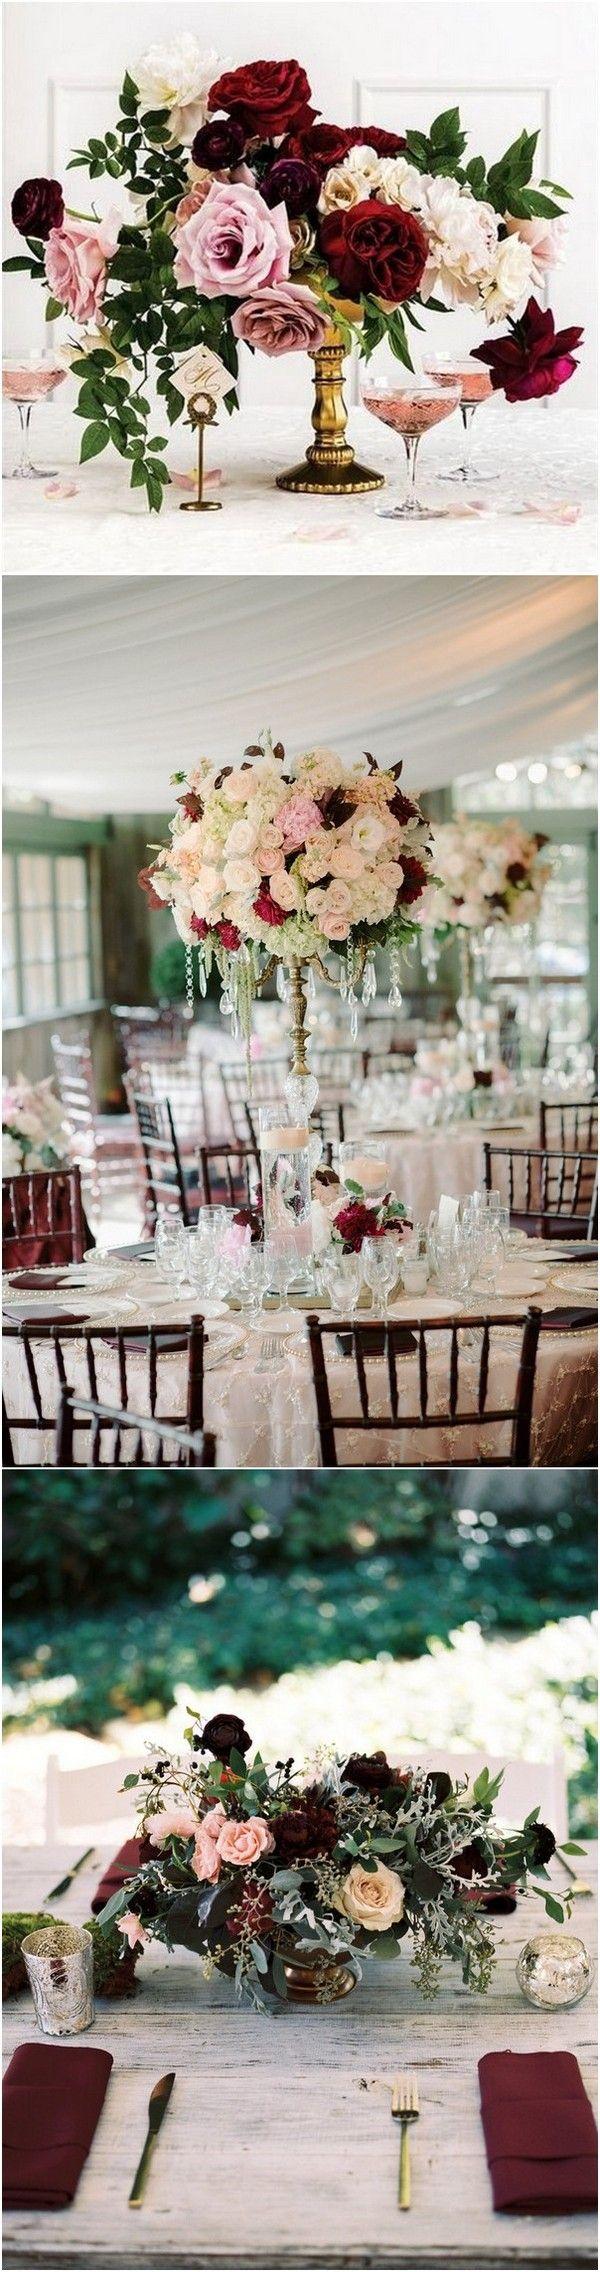 Mariage - Trending-10 Burgundy And Blush Wedding Centerpieces For 2018